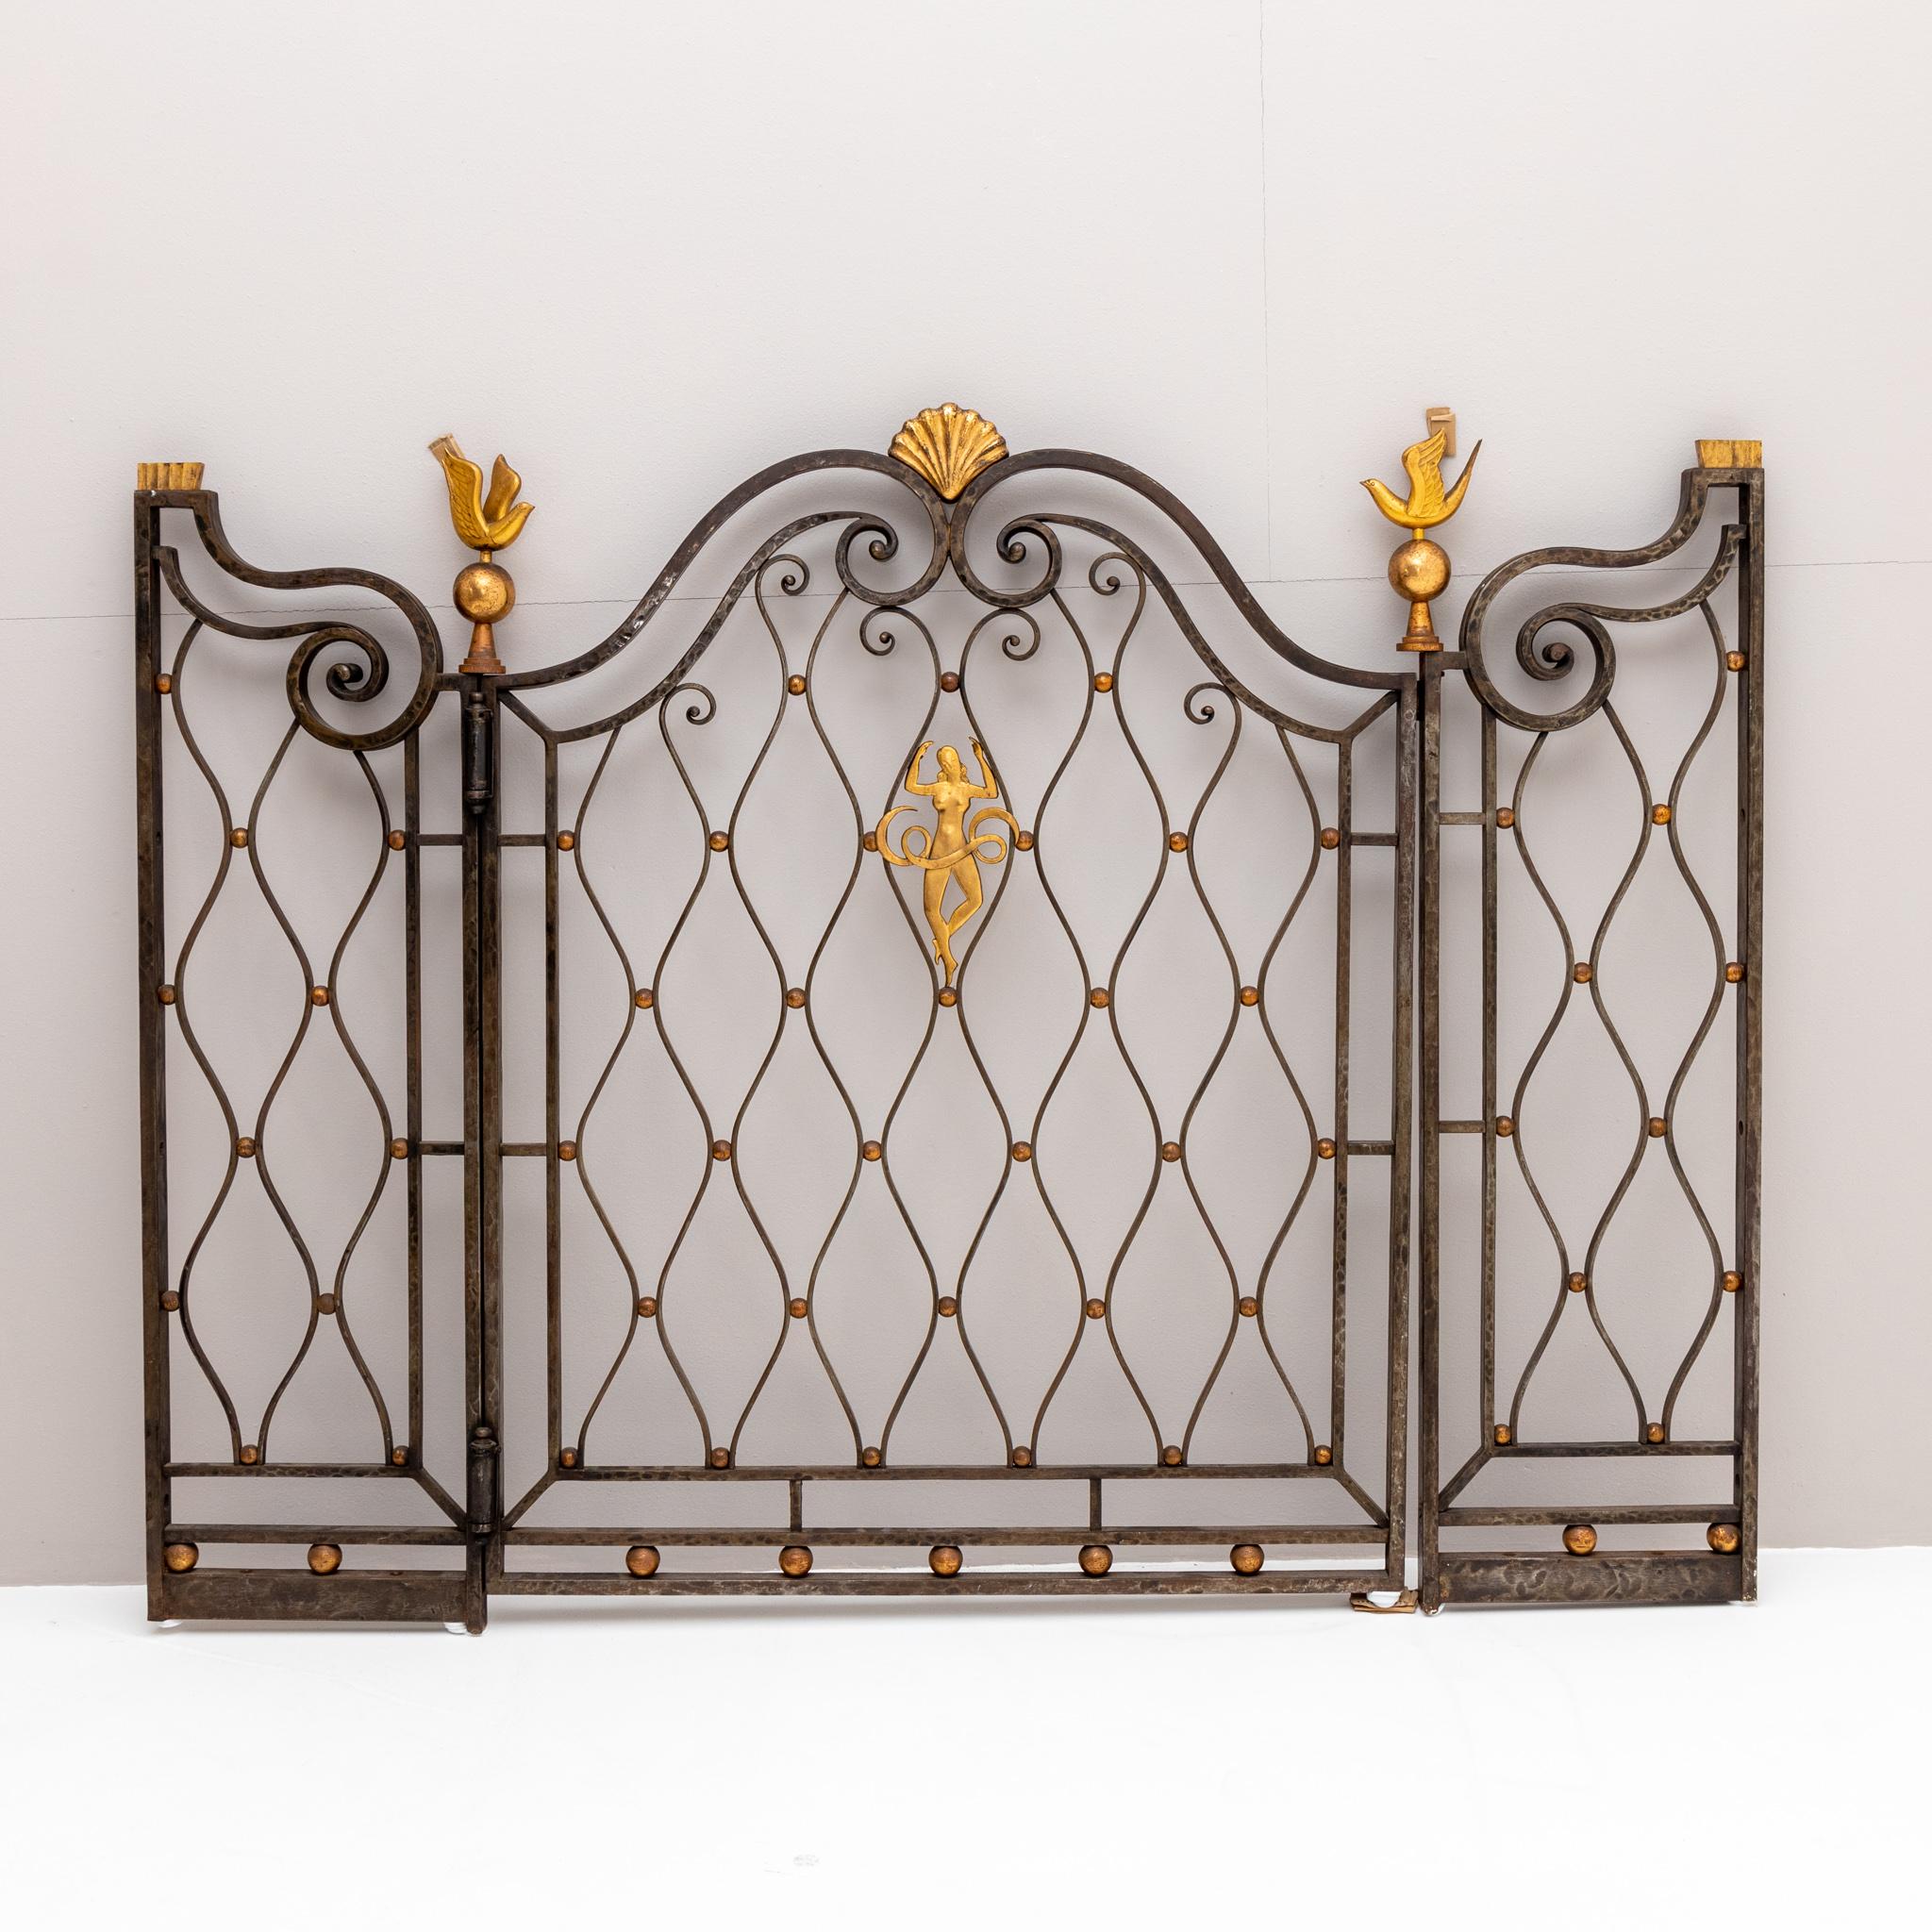 Fence element with gold patinated decors in the form of doves, shells, and a central female figure. For comparable pieces see Lit.: Francois Baudot: Gilbert Poillerat maitre ferronnier. Paris 1992, p. 238f.